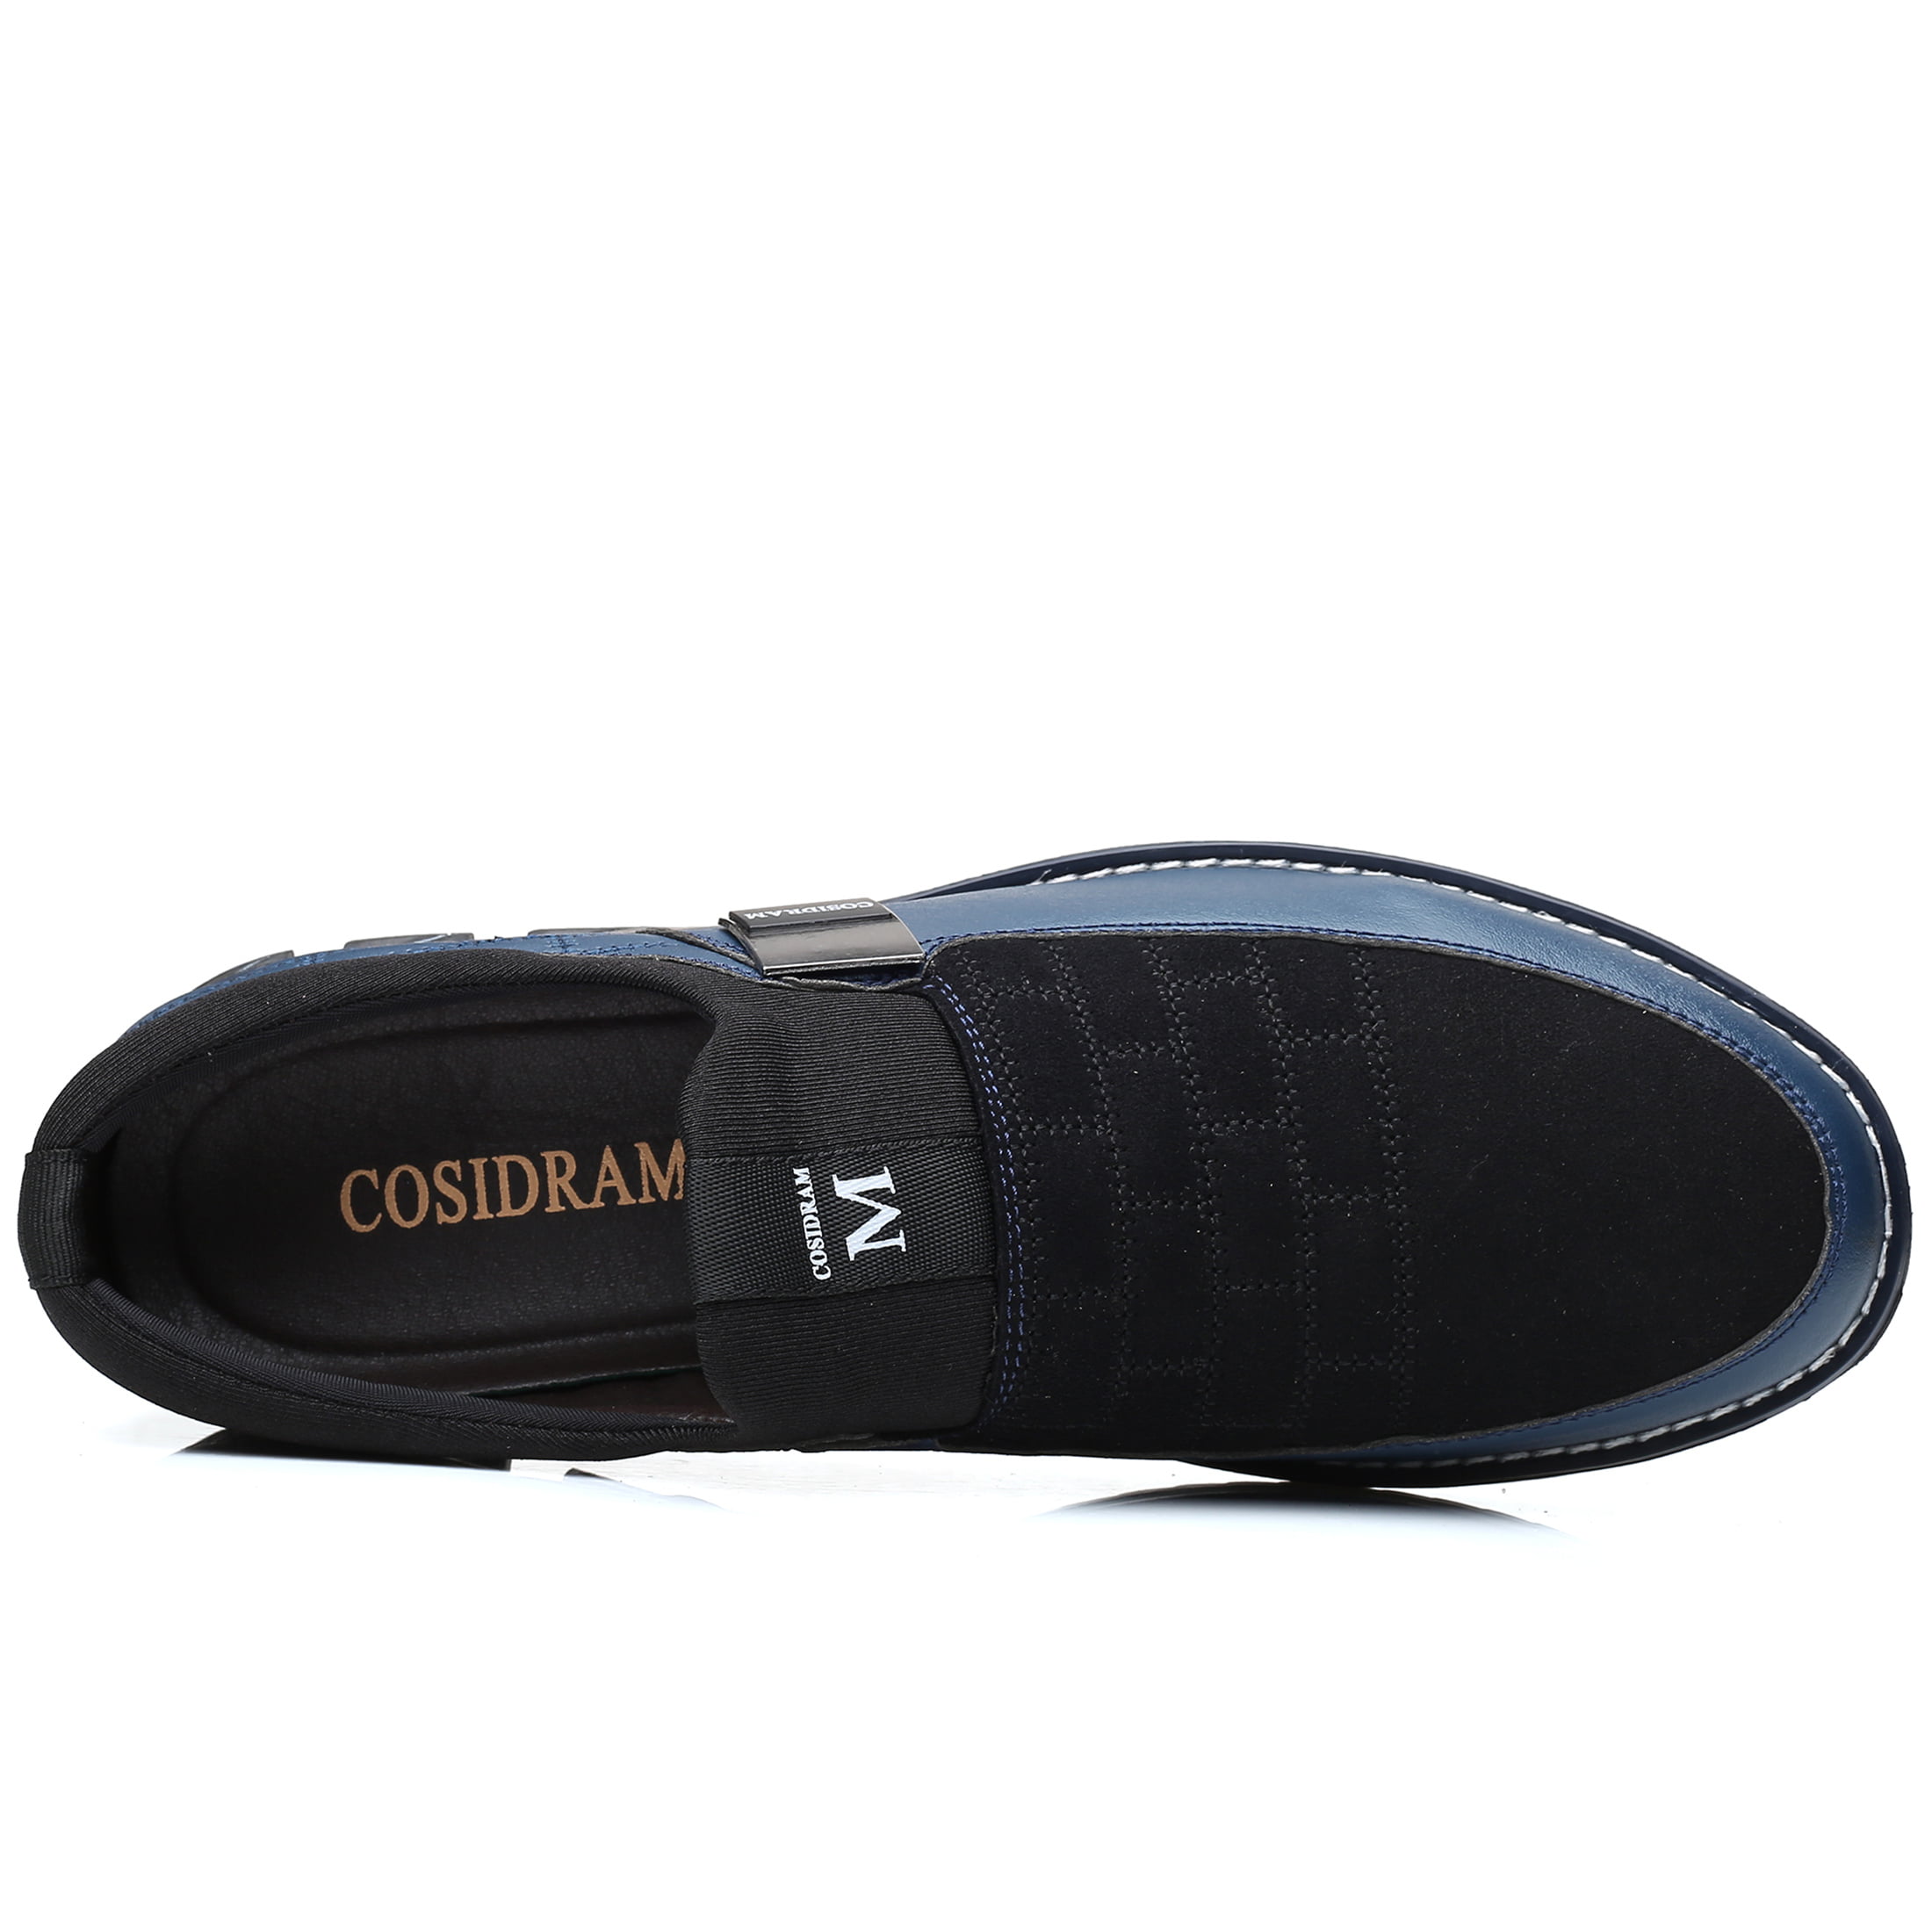 COSIDRAM Mens Shoes Slip on Loafers Casual Soft Microfiber Leather Shoes Driving Walking Shoes for Male Fashion Sneakers 